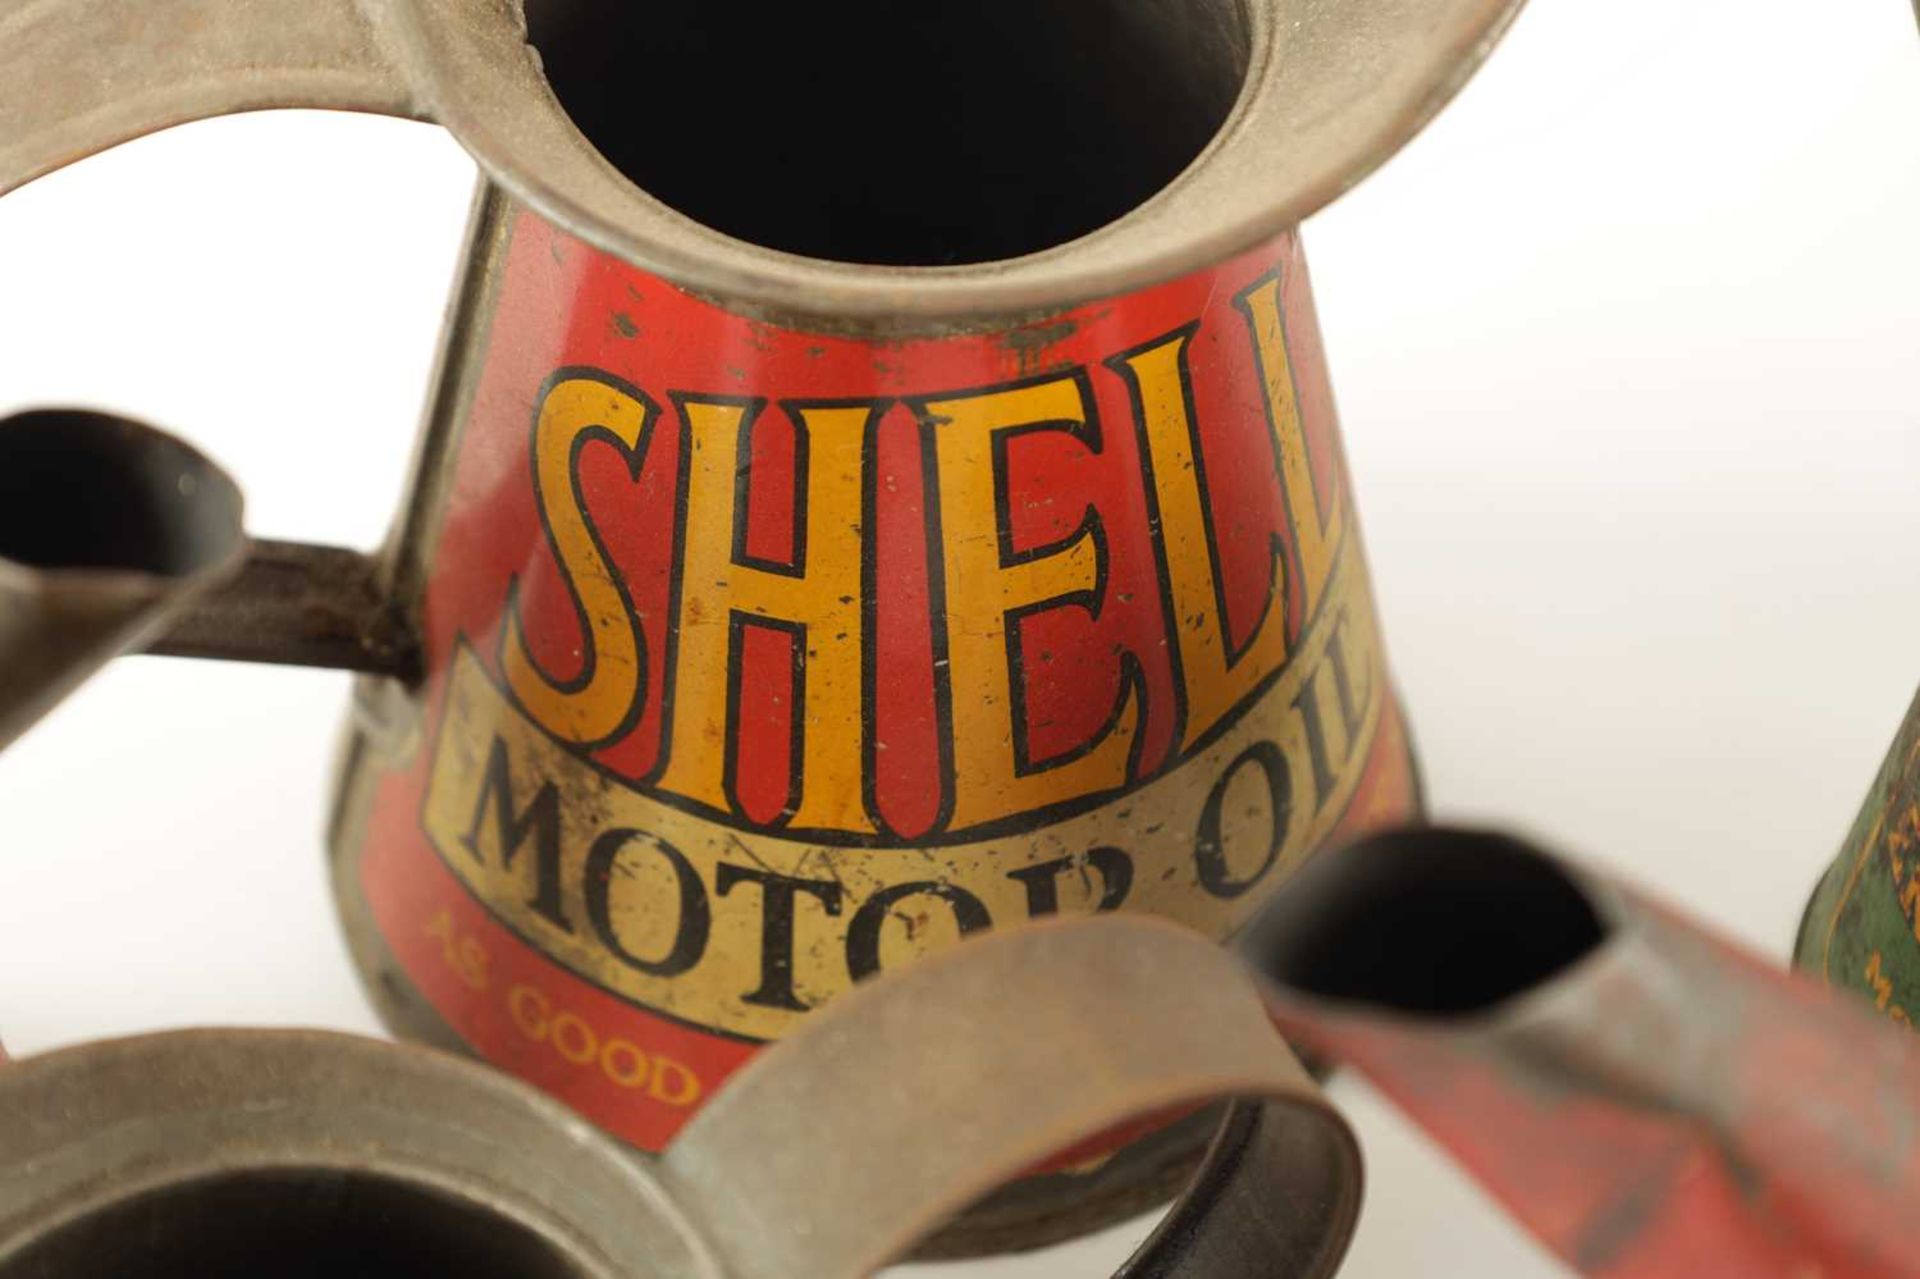 A COLLECTION OF FIVE VINTAGE MOTOR OIL CANS - Image 5 of 8